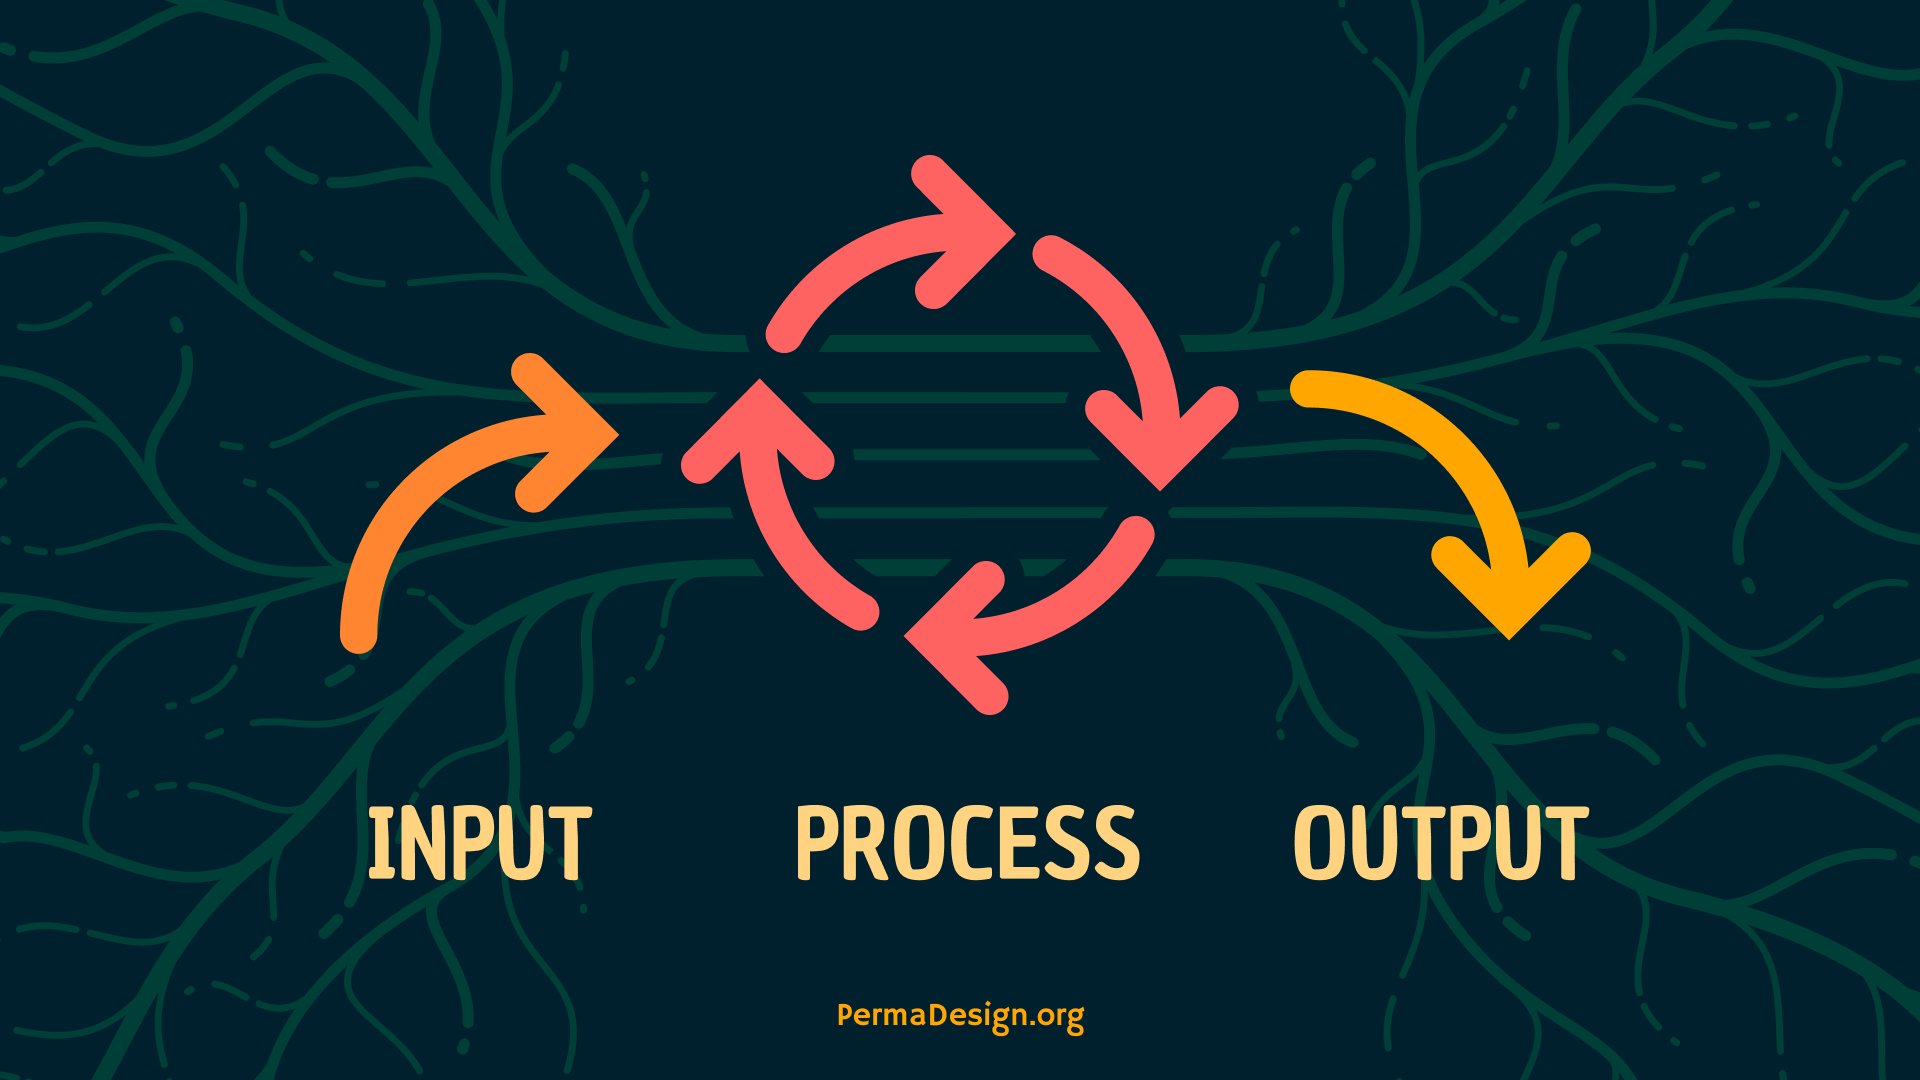 Energy flows in, through and out of each element in a pattern of Input, Process and Output.